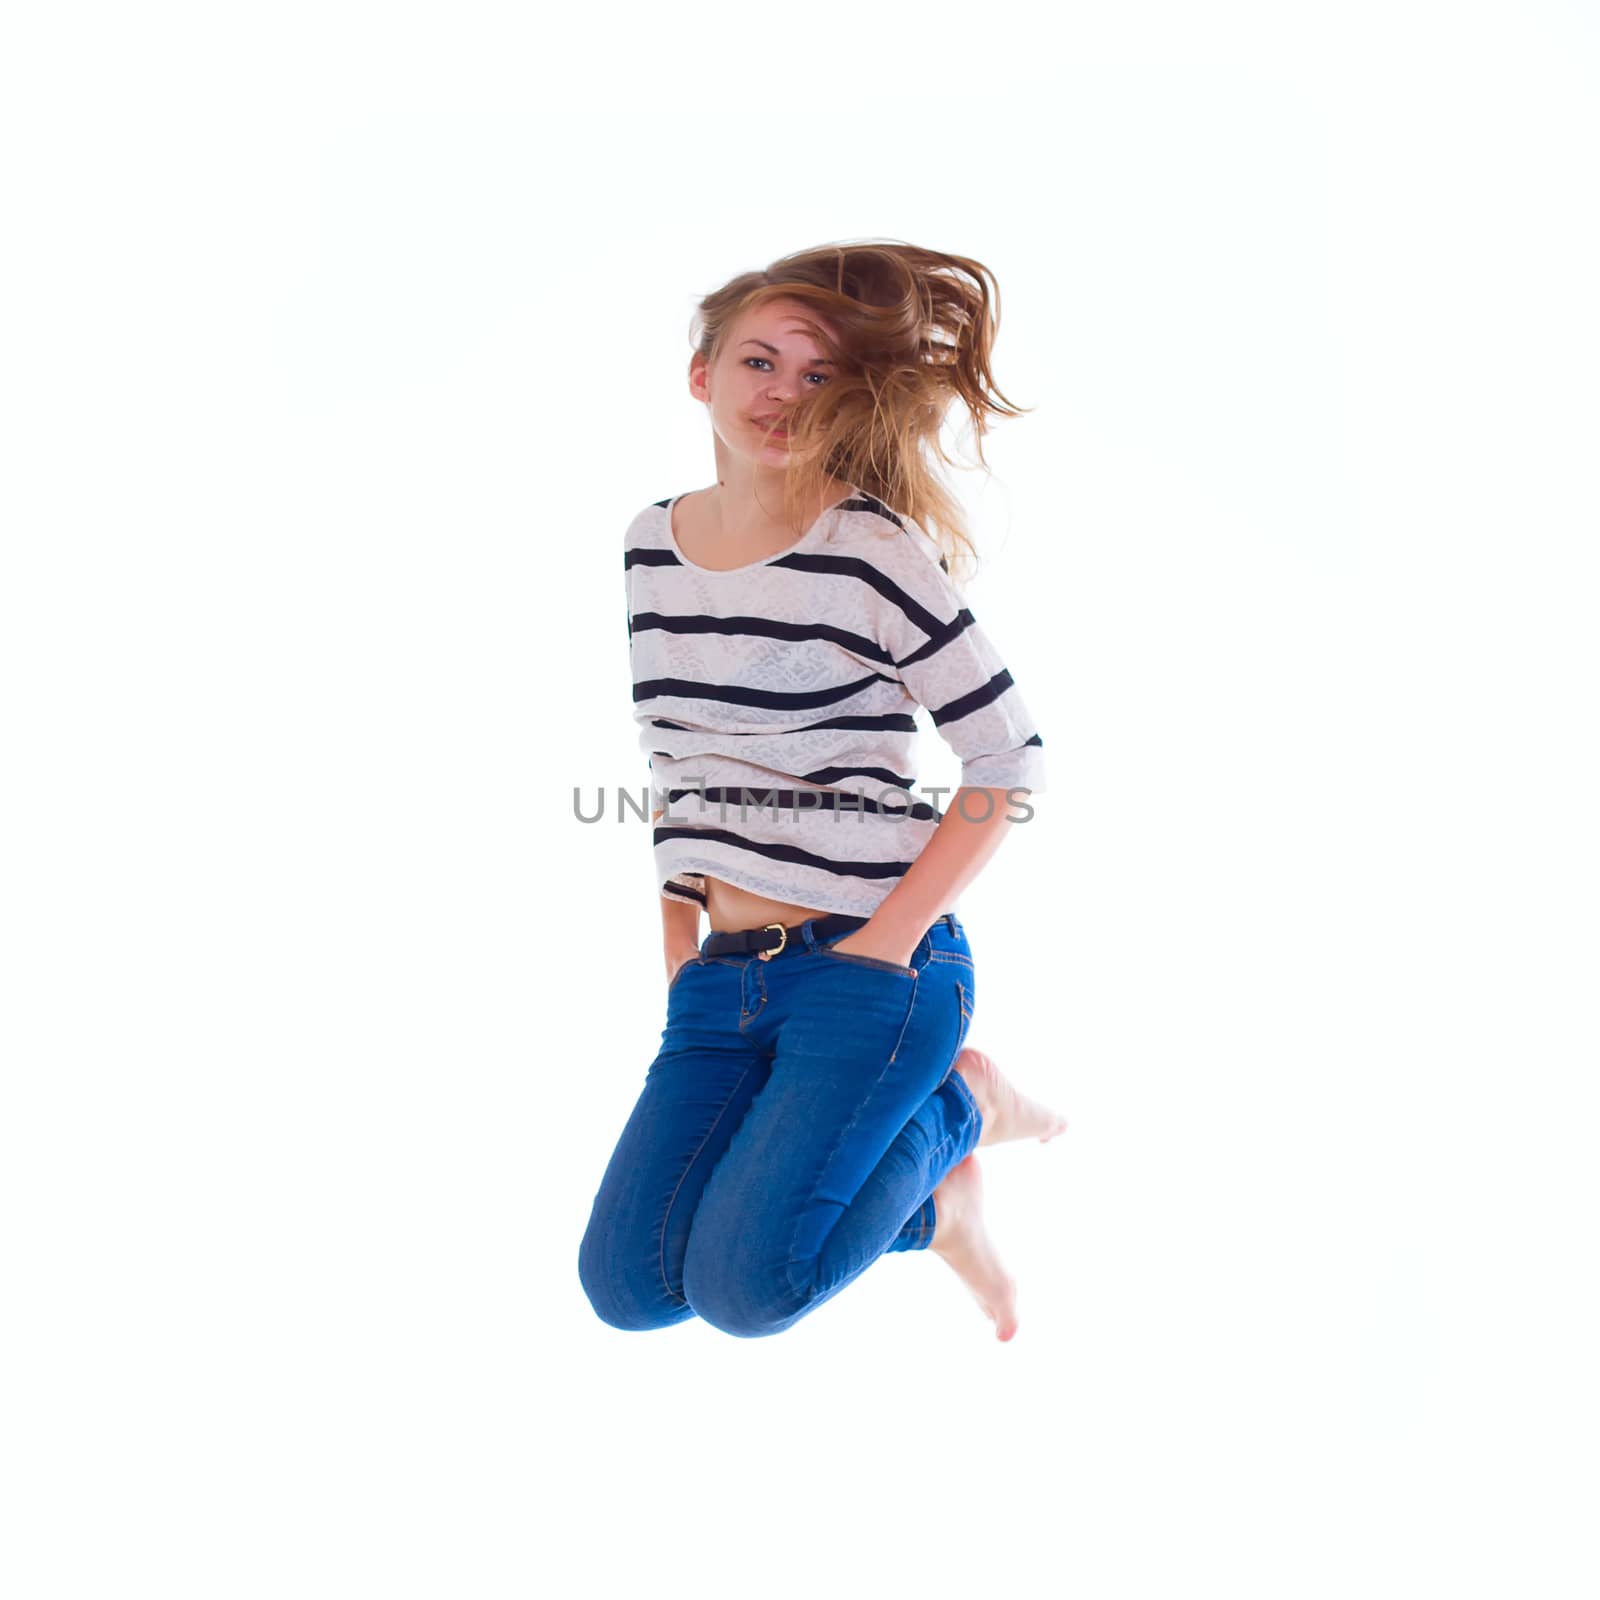 smiling  girl in white blank t-shirt jumping by victosha